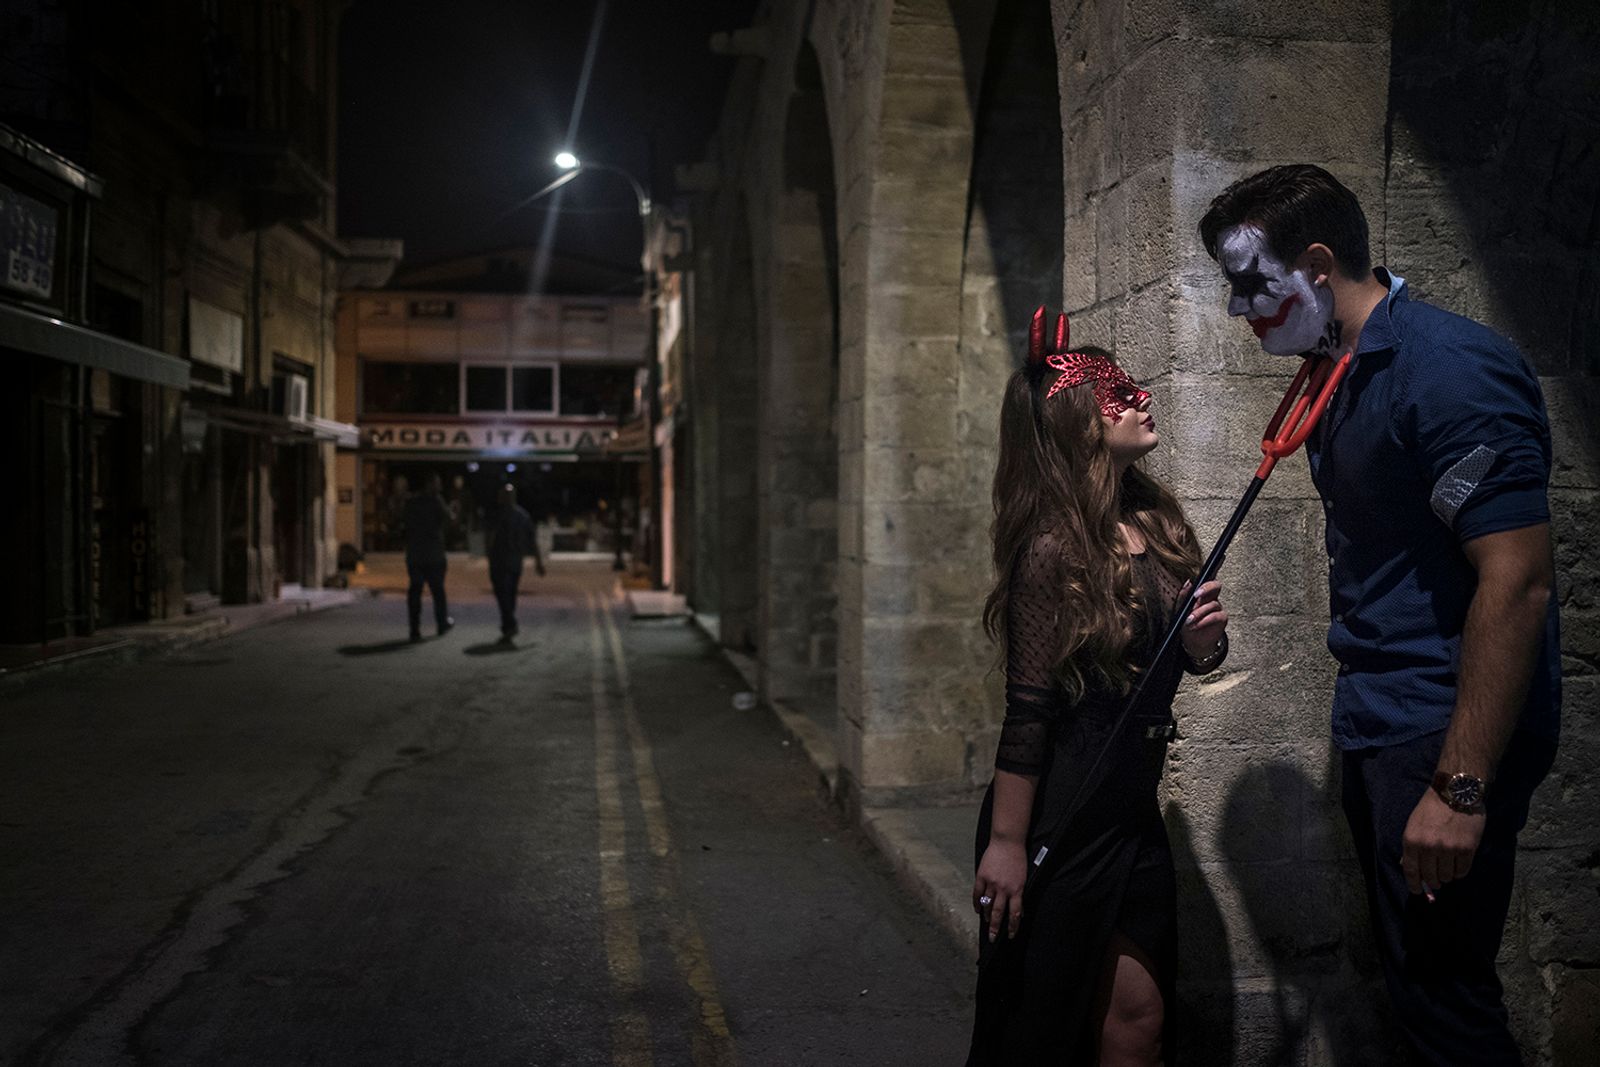 © Sahan Nuhoglu - A Turkish Cypriot couple is pictured at a Halloween party held in front of Buyuk Khan, north Nicosia.